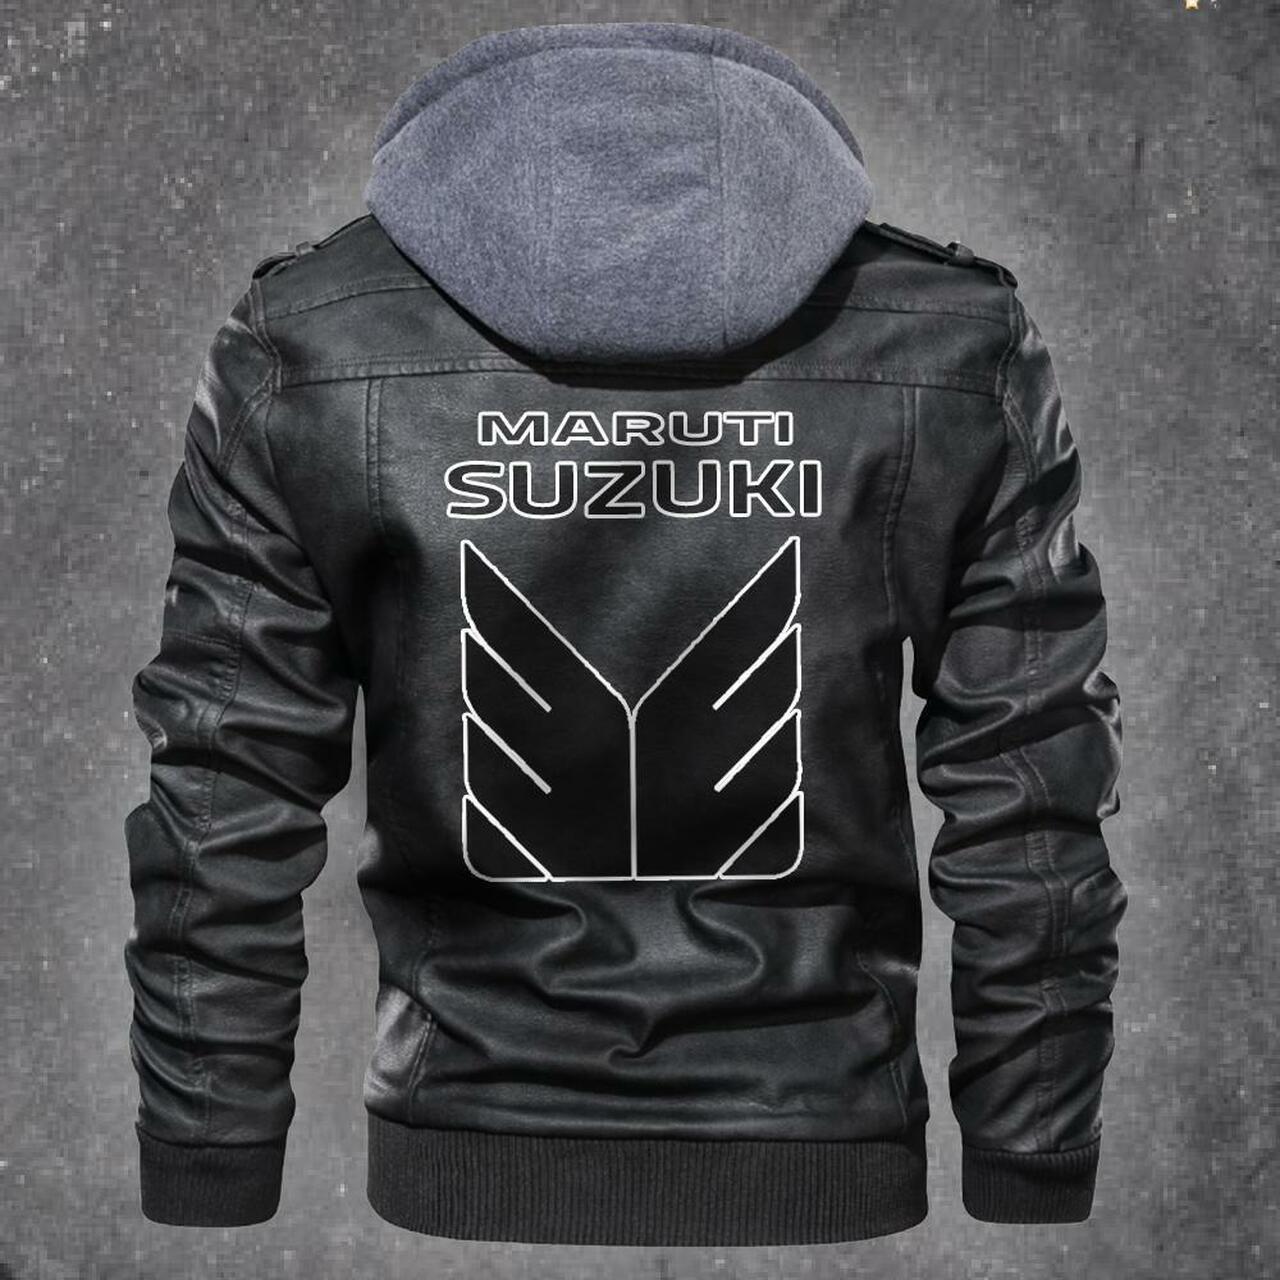 You'll get the best Leather Jacket by shopping online 131